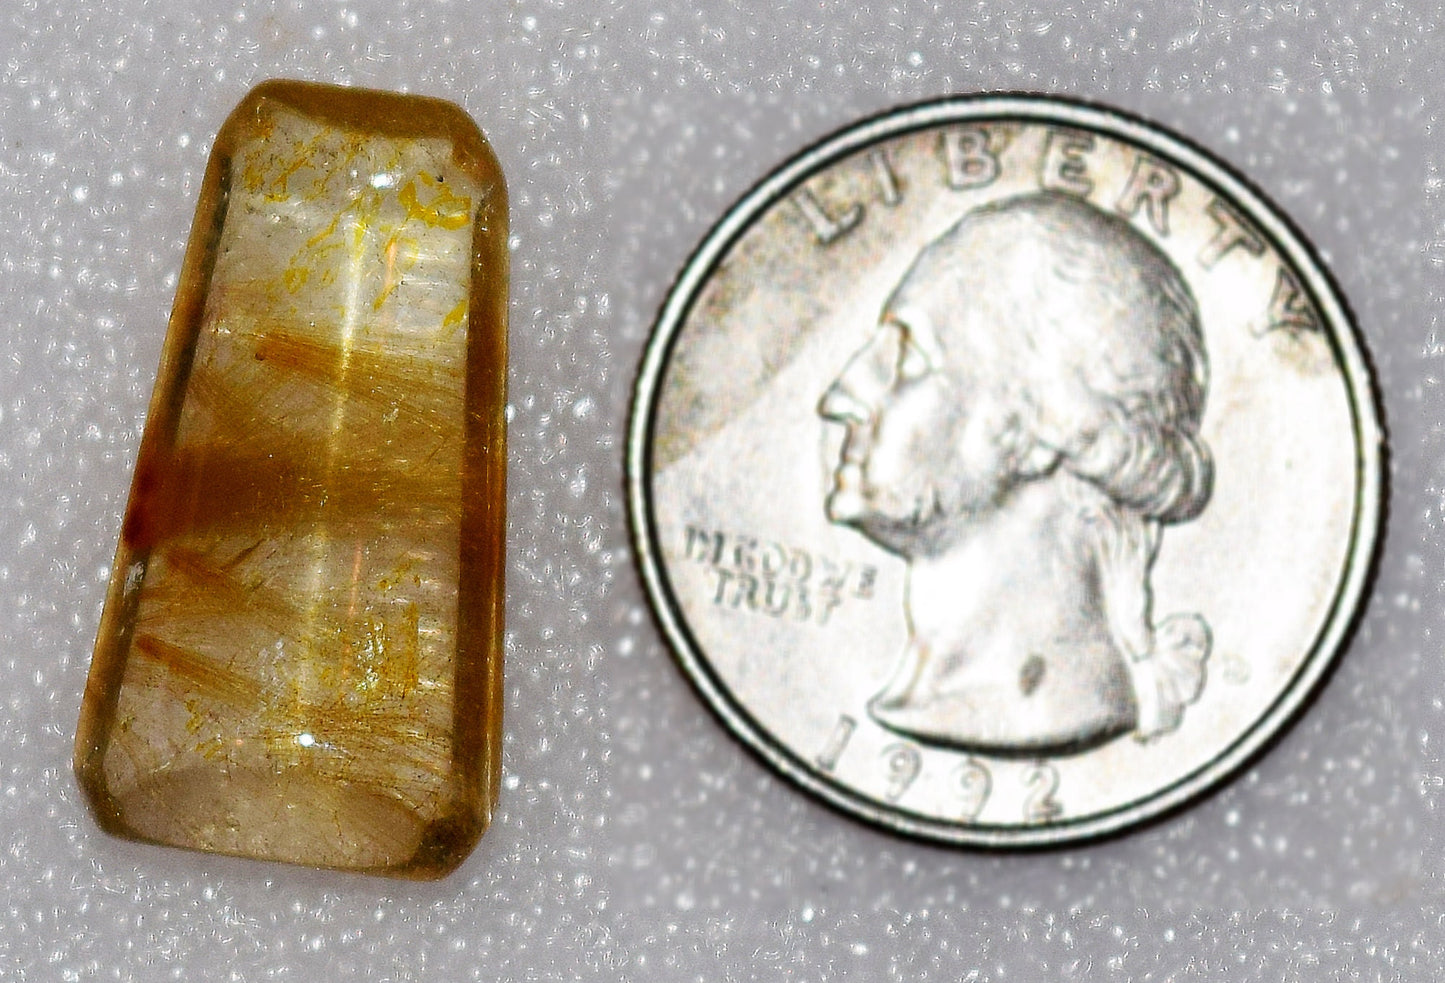 So soothing for such a dynamo energy stone! Rutilated Quartz gem for you!